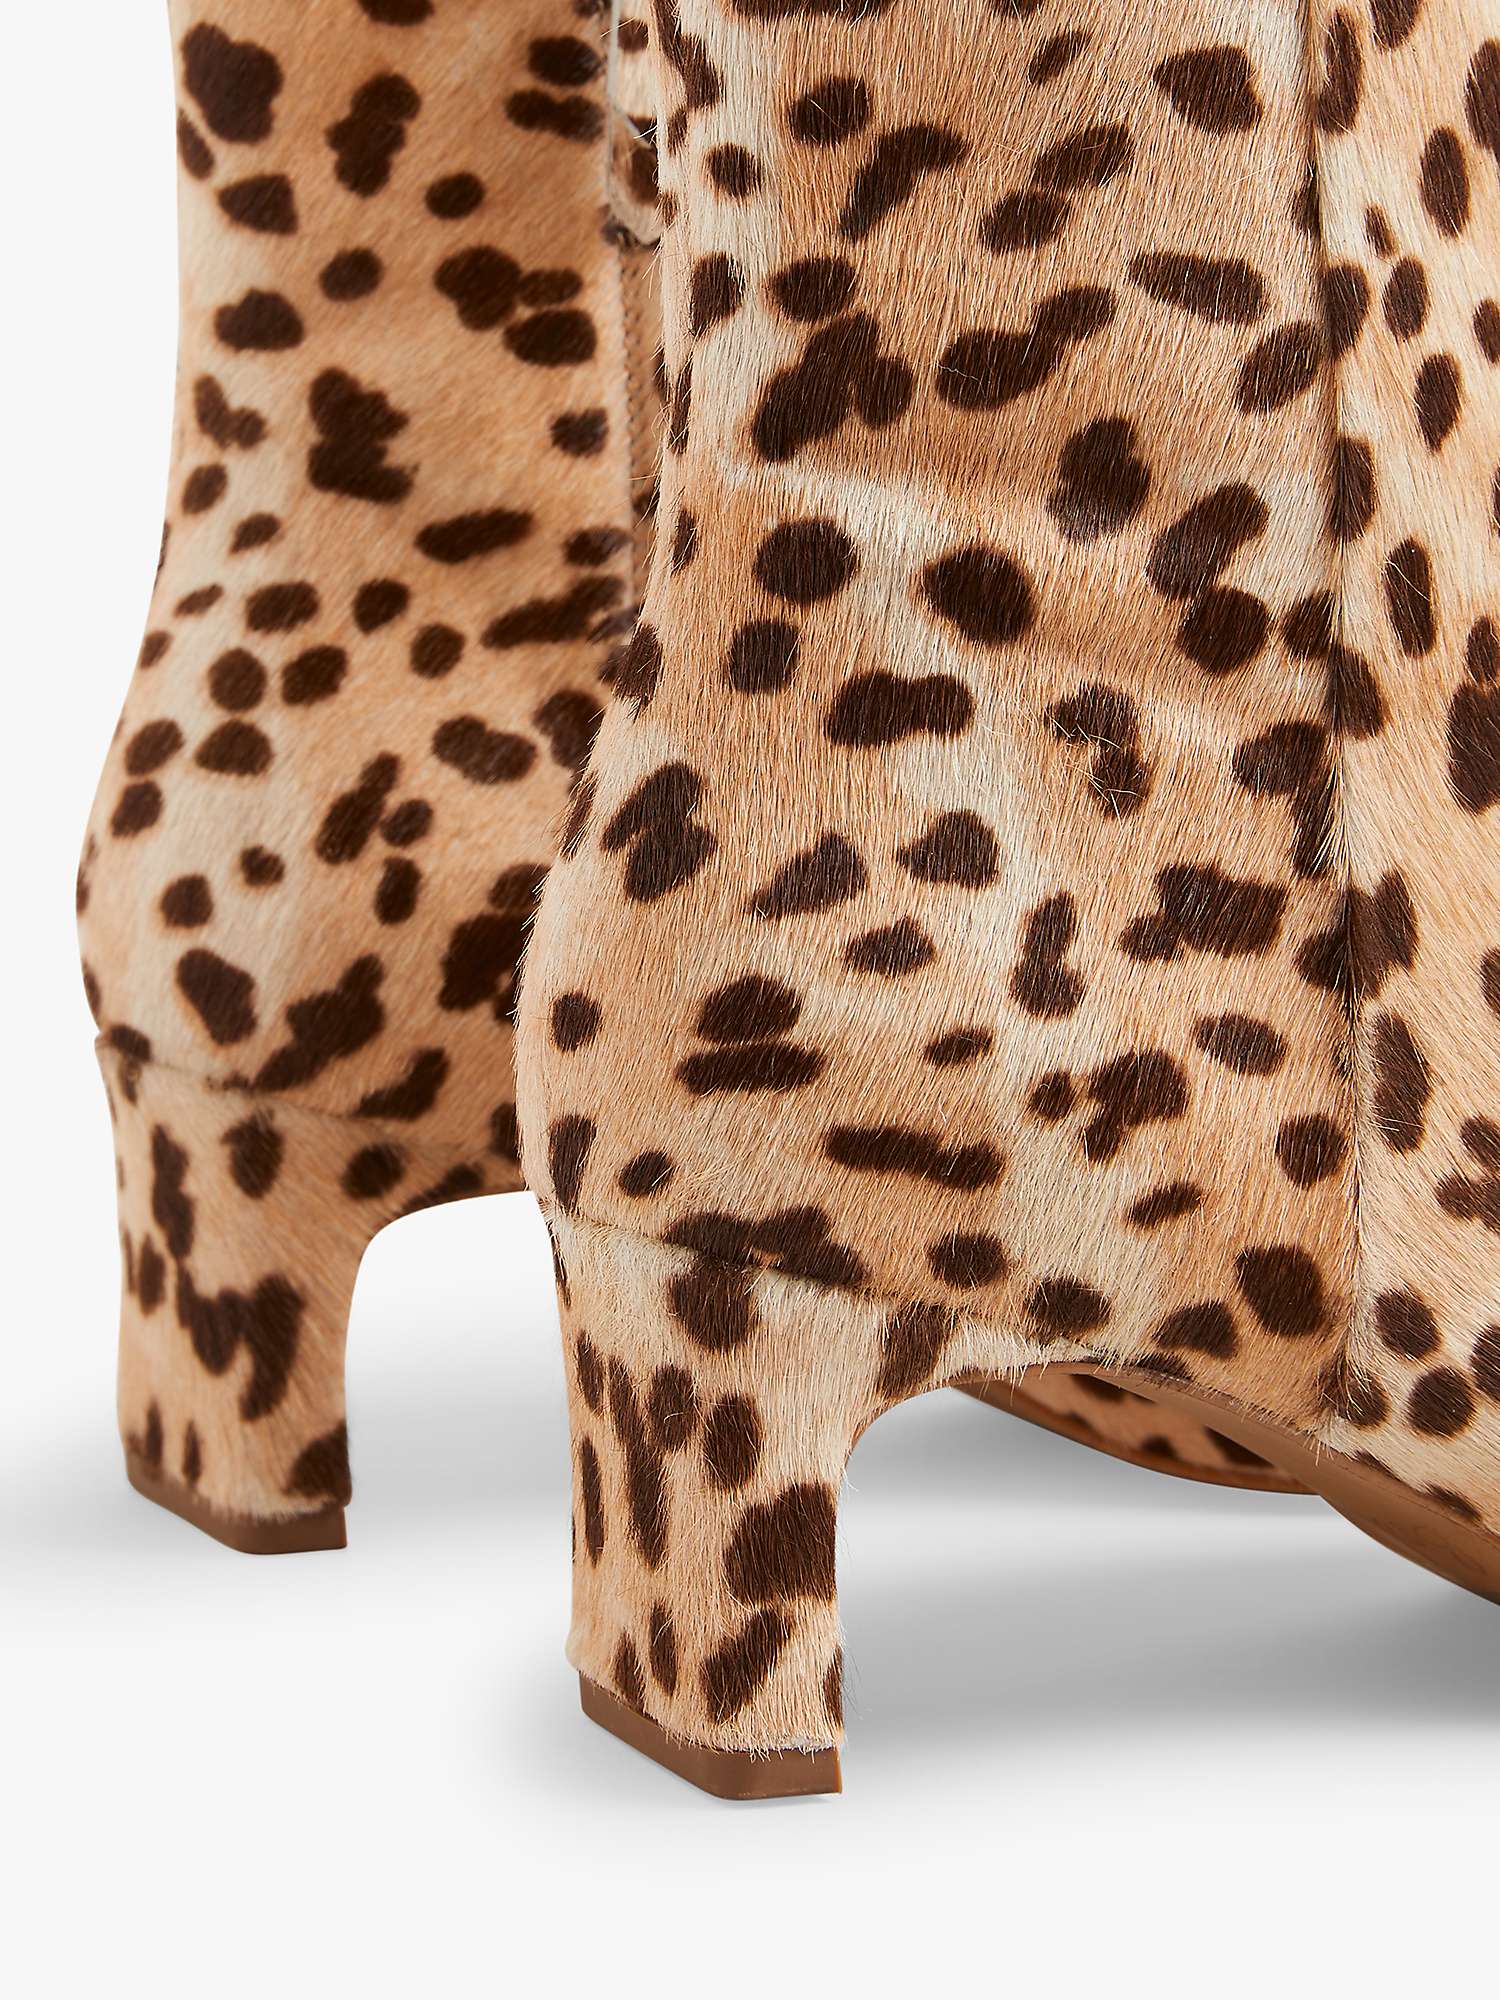 Buy Boden Leopard Straight Ankle Boots, Neutral Online at johnlewis.com